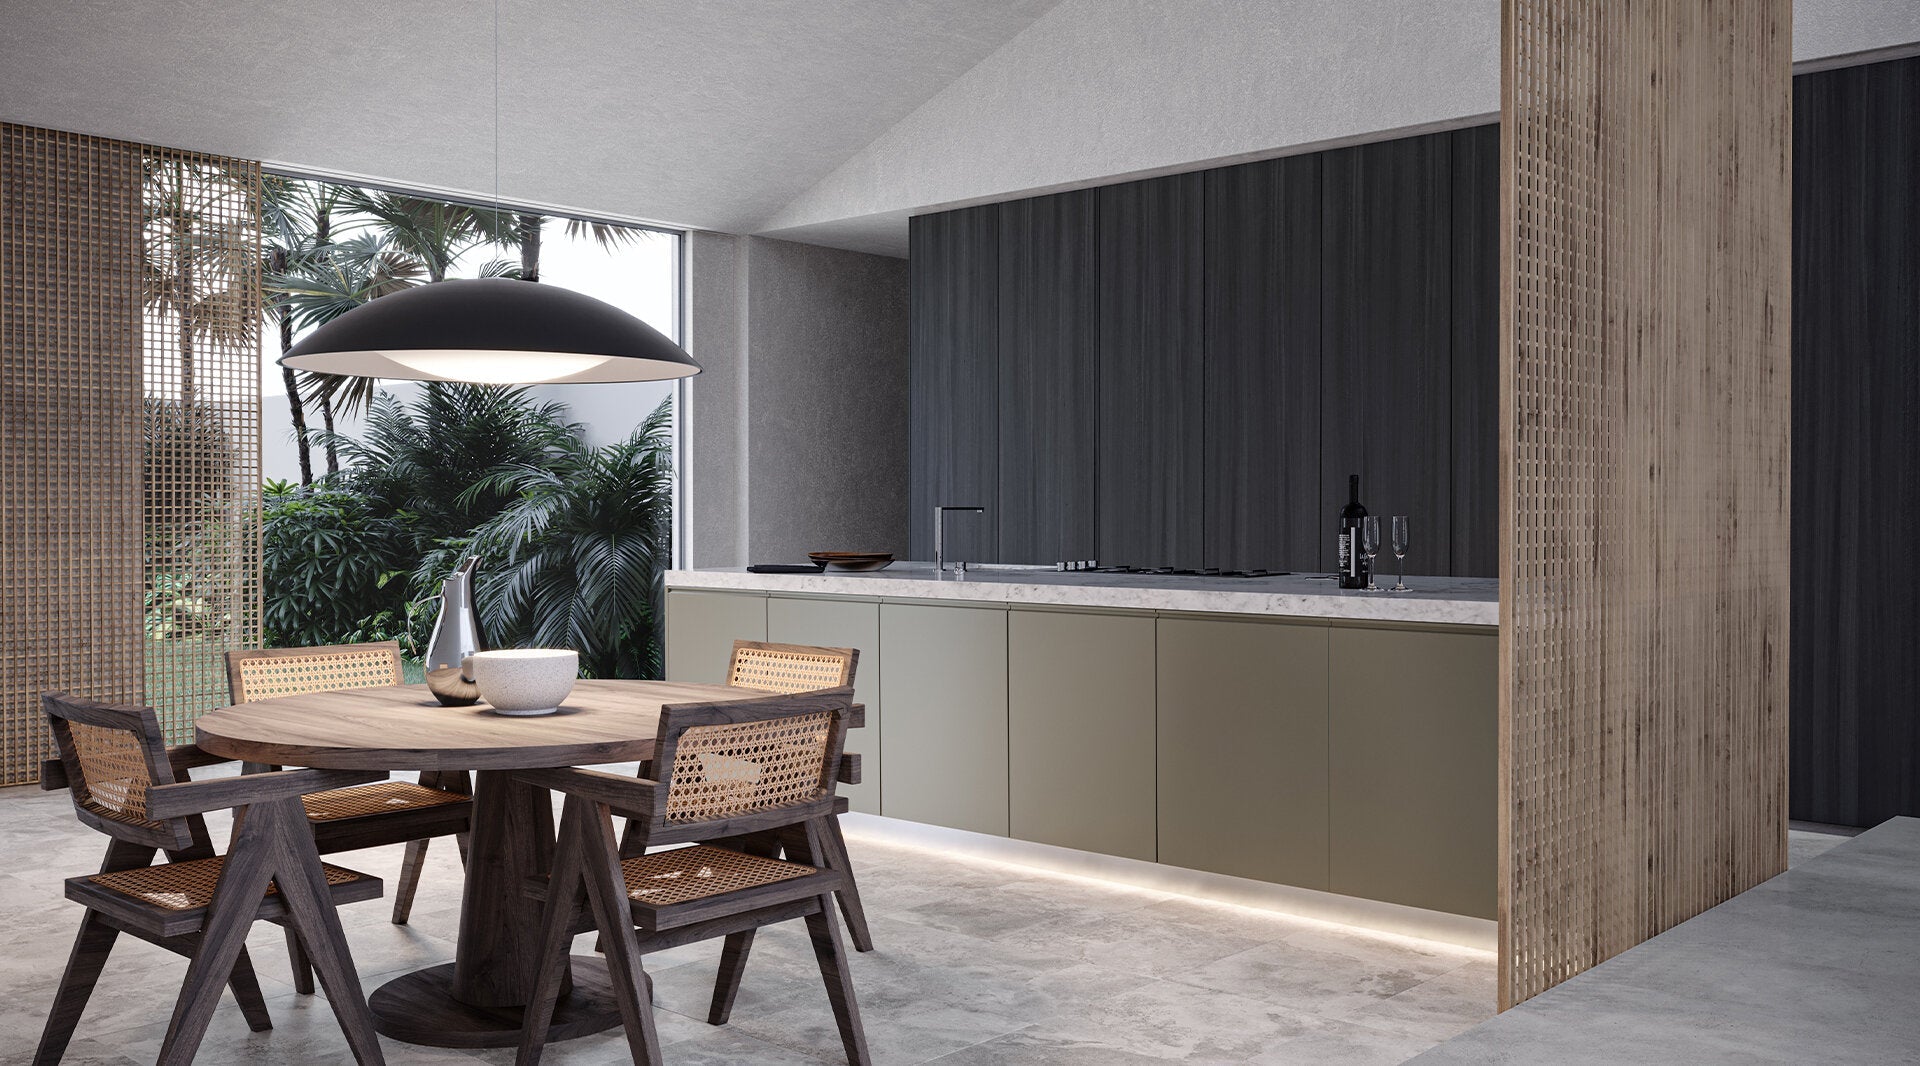 Modern minimalist kitchen with Anatolia Veneta porcelain tile collection, featuring elegant wood-look and textured wall tiles, stylish pendant lighting, and contemporary furniture.